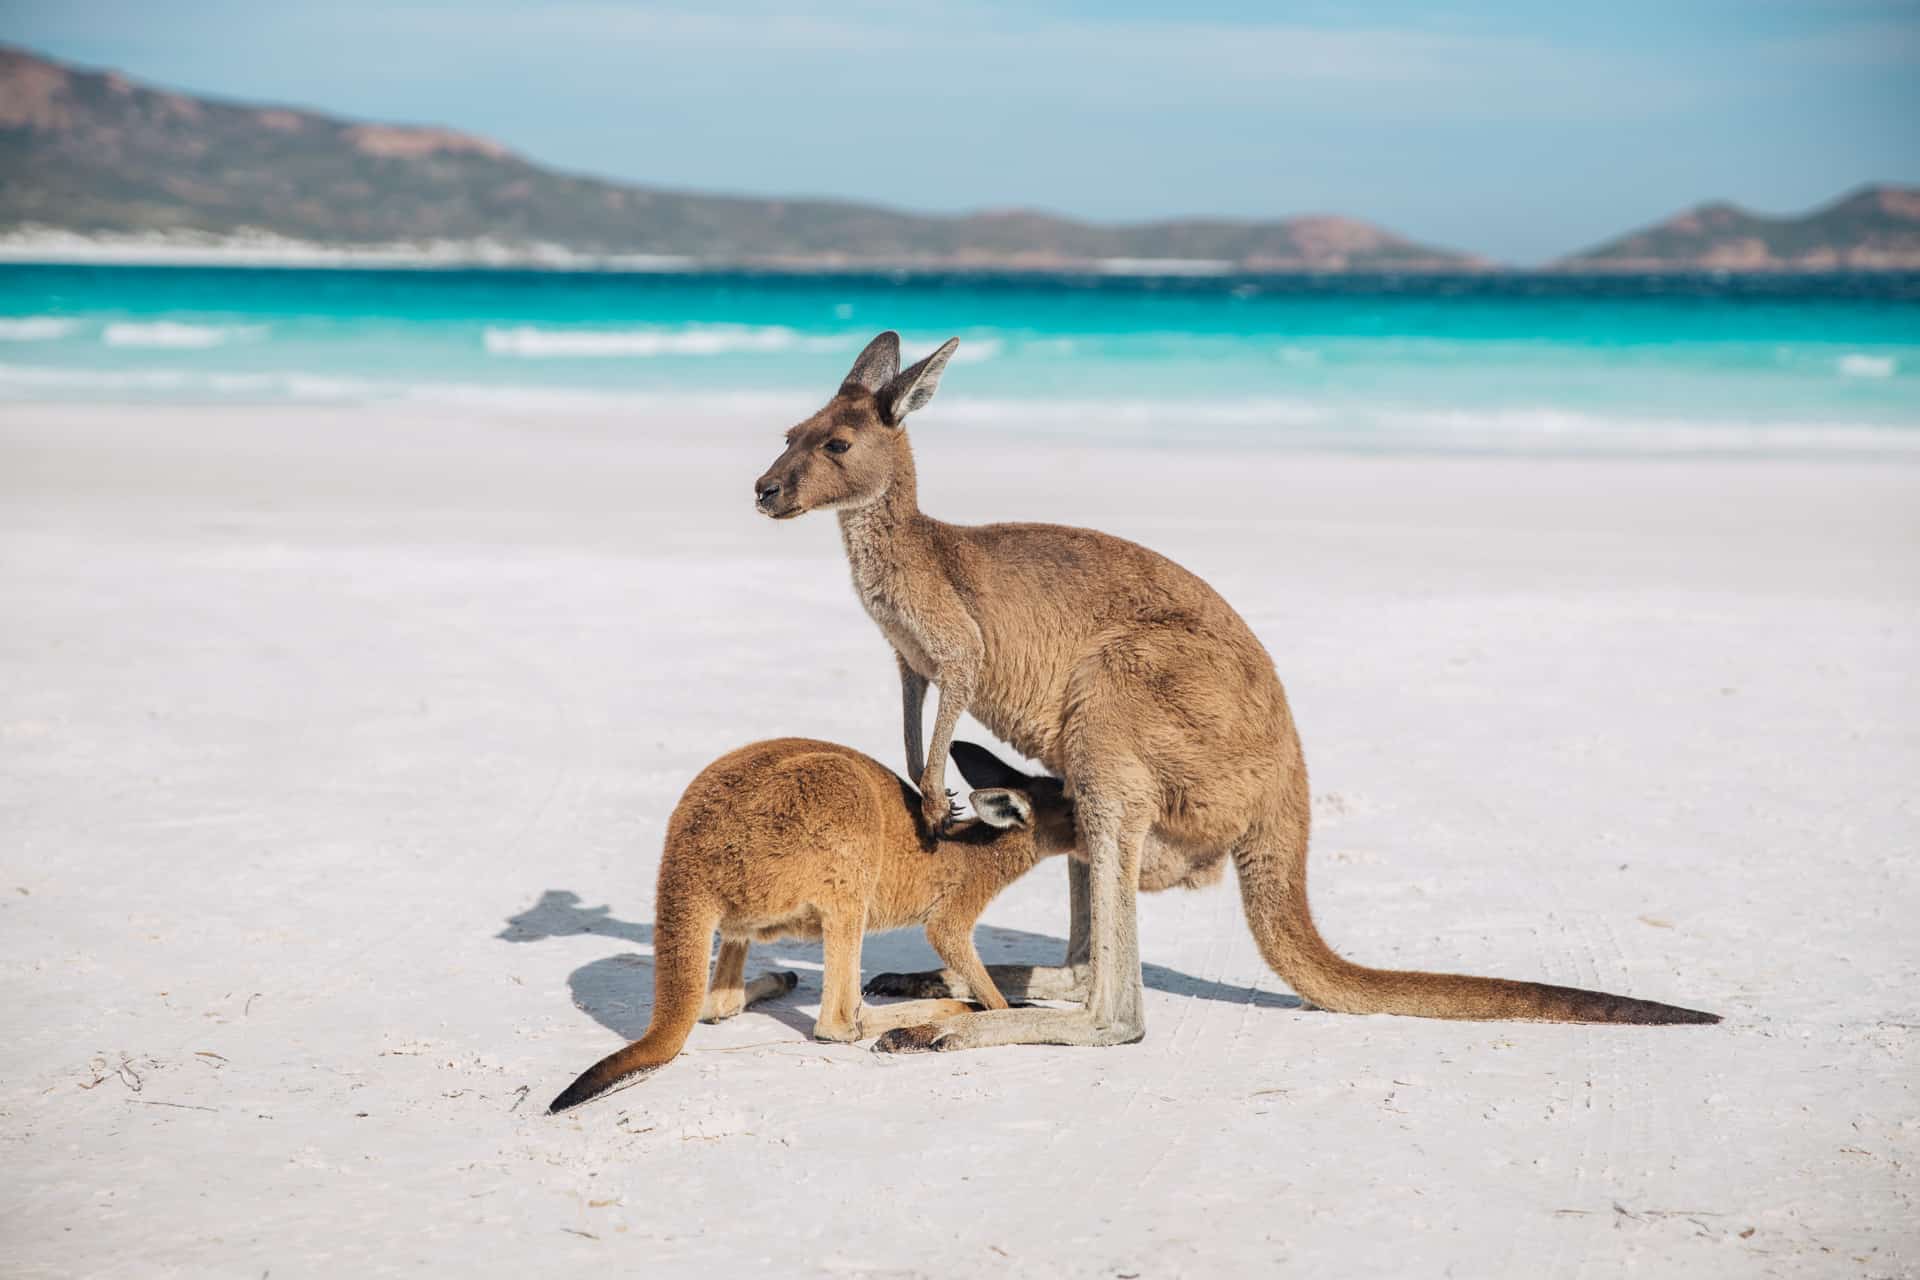 things to do in esperance, what to do in esperance, esperance things to do, esperance attractions, beaches in esperance, lucky bay, lucky bay esperance, lucky bay kangaroos